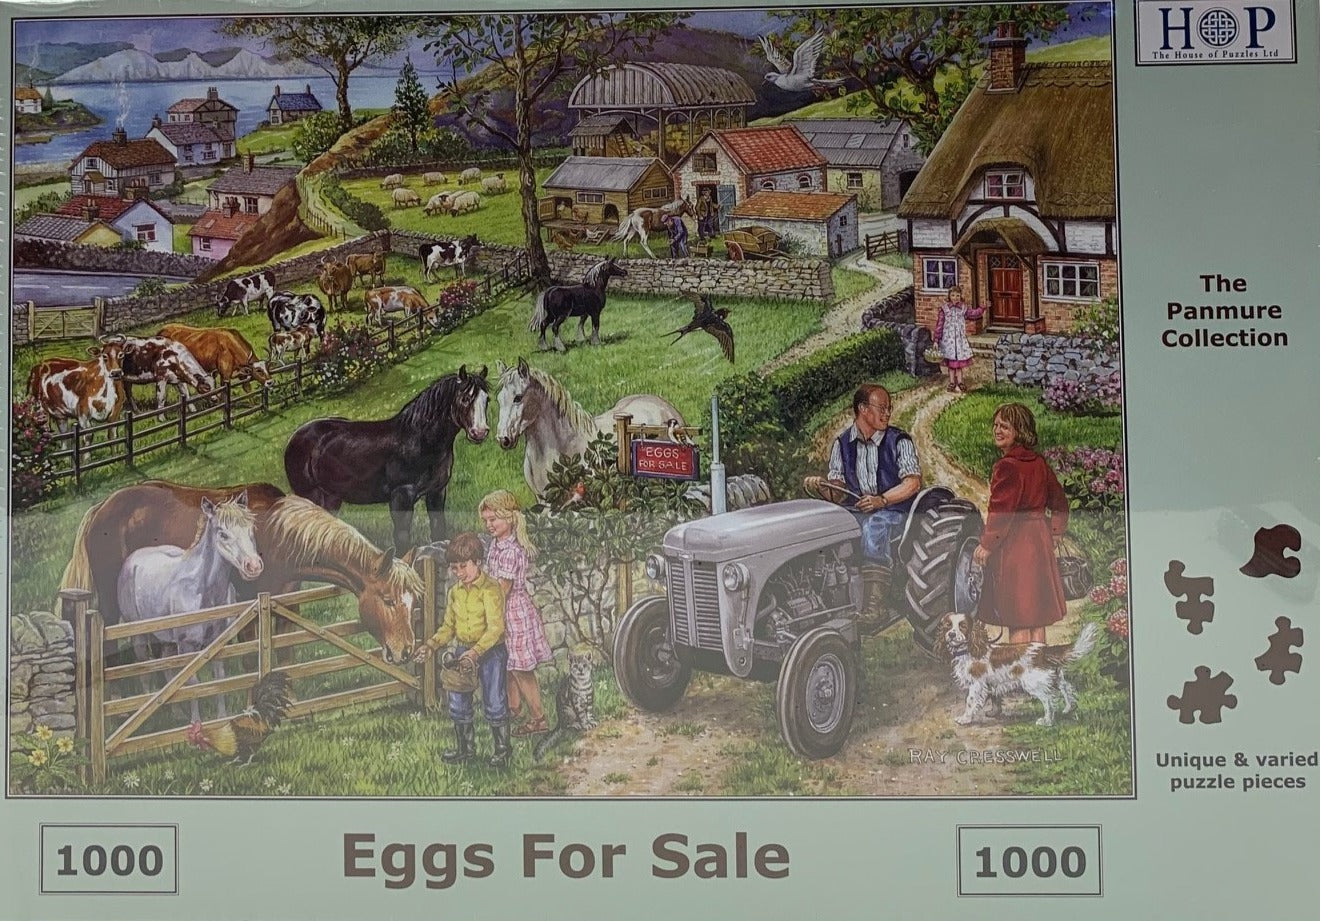 The House of Puzzles Eggs For Sale